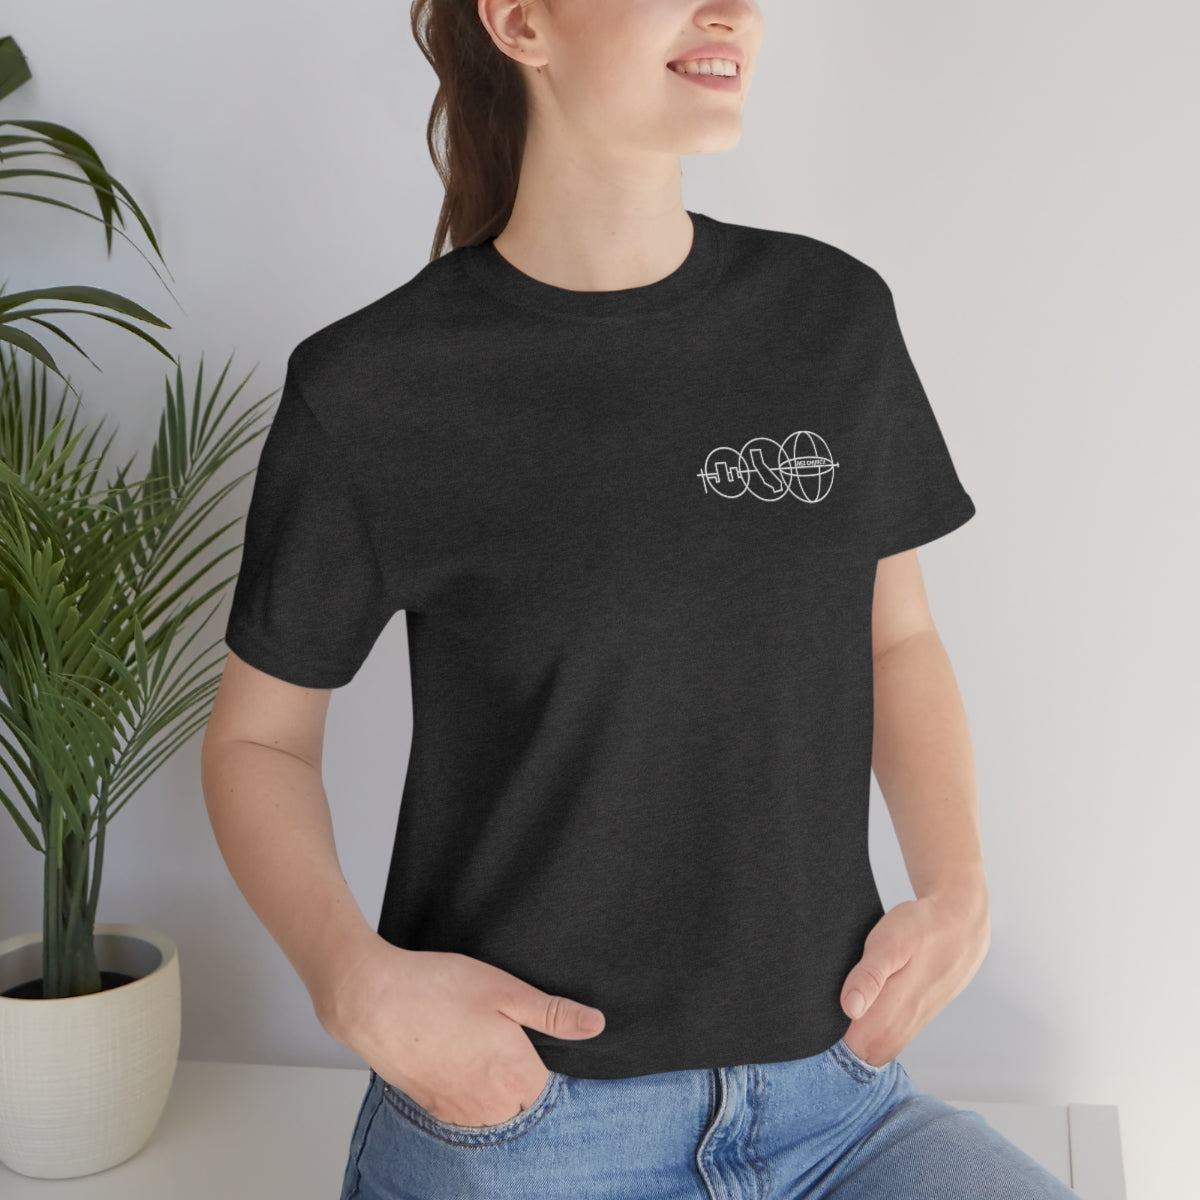 City State Earth - Unisex Jersey Short Sleeve Tee